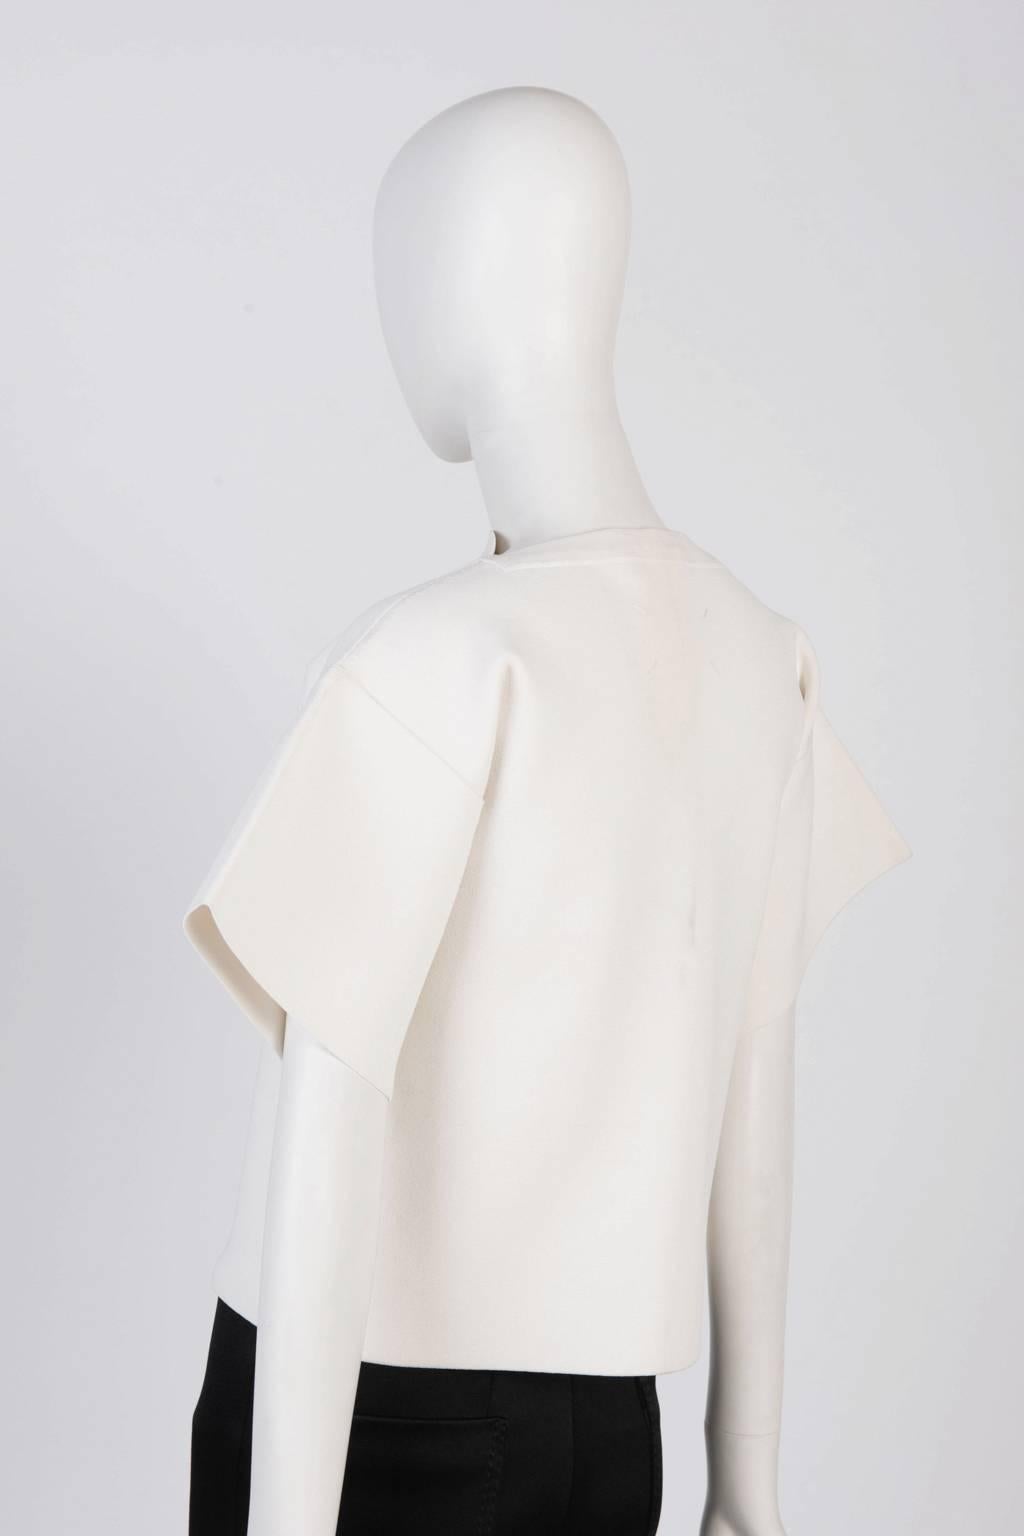 Maison Martin Margiela Heavy Knit Structured Top In Excellent Condition For Sale In Xiamen, Fujian